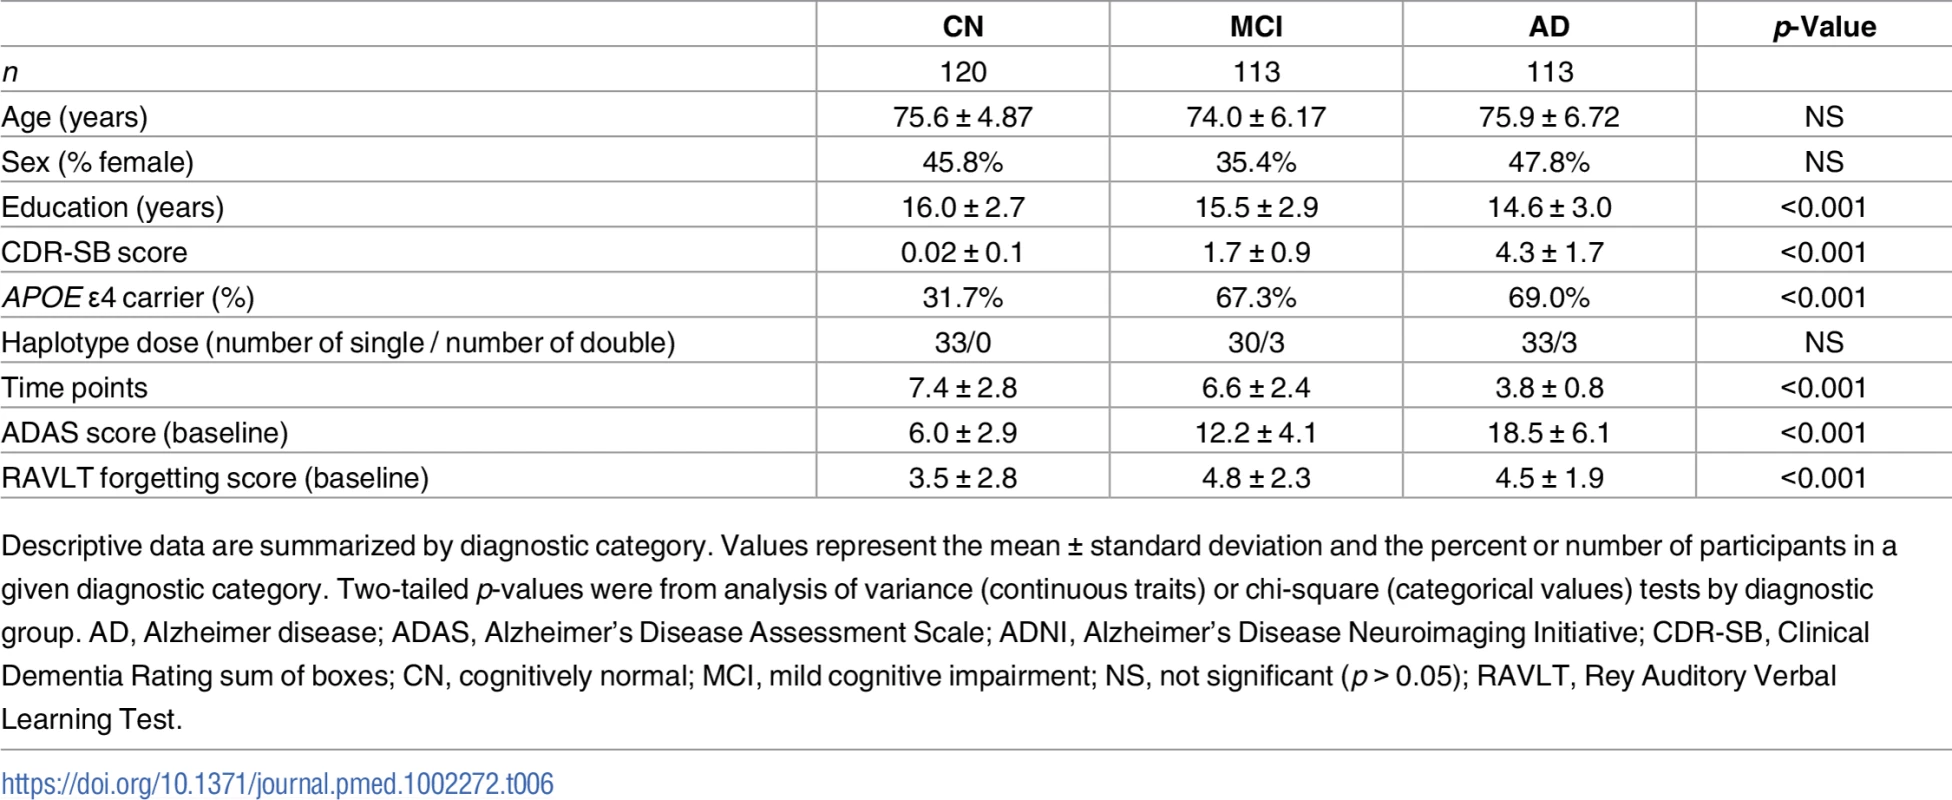 Summary statistics for ADNI participants with longitudinal cognitive measures.